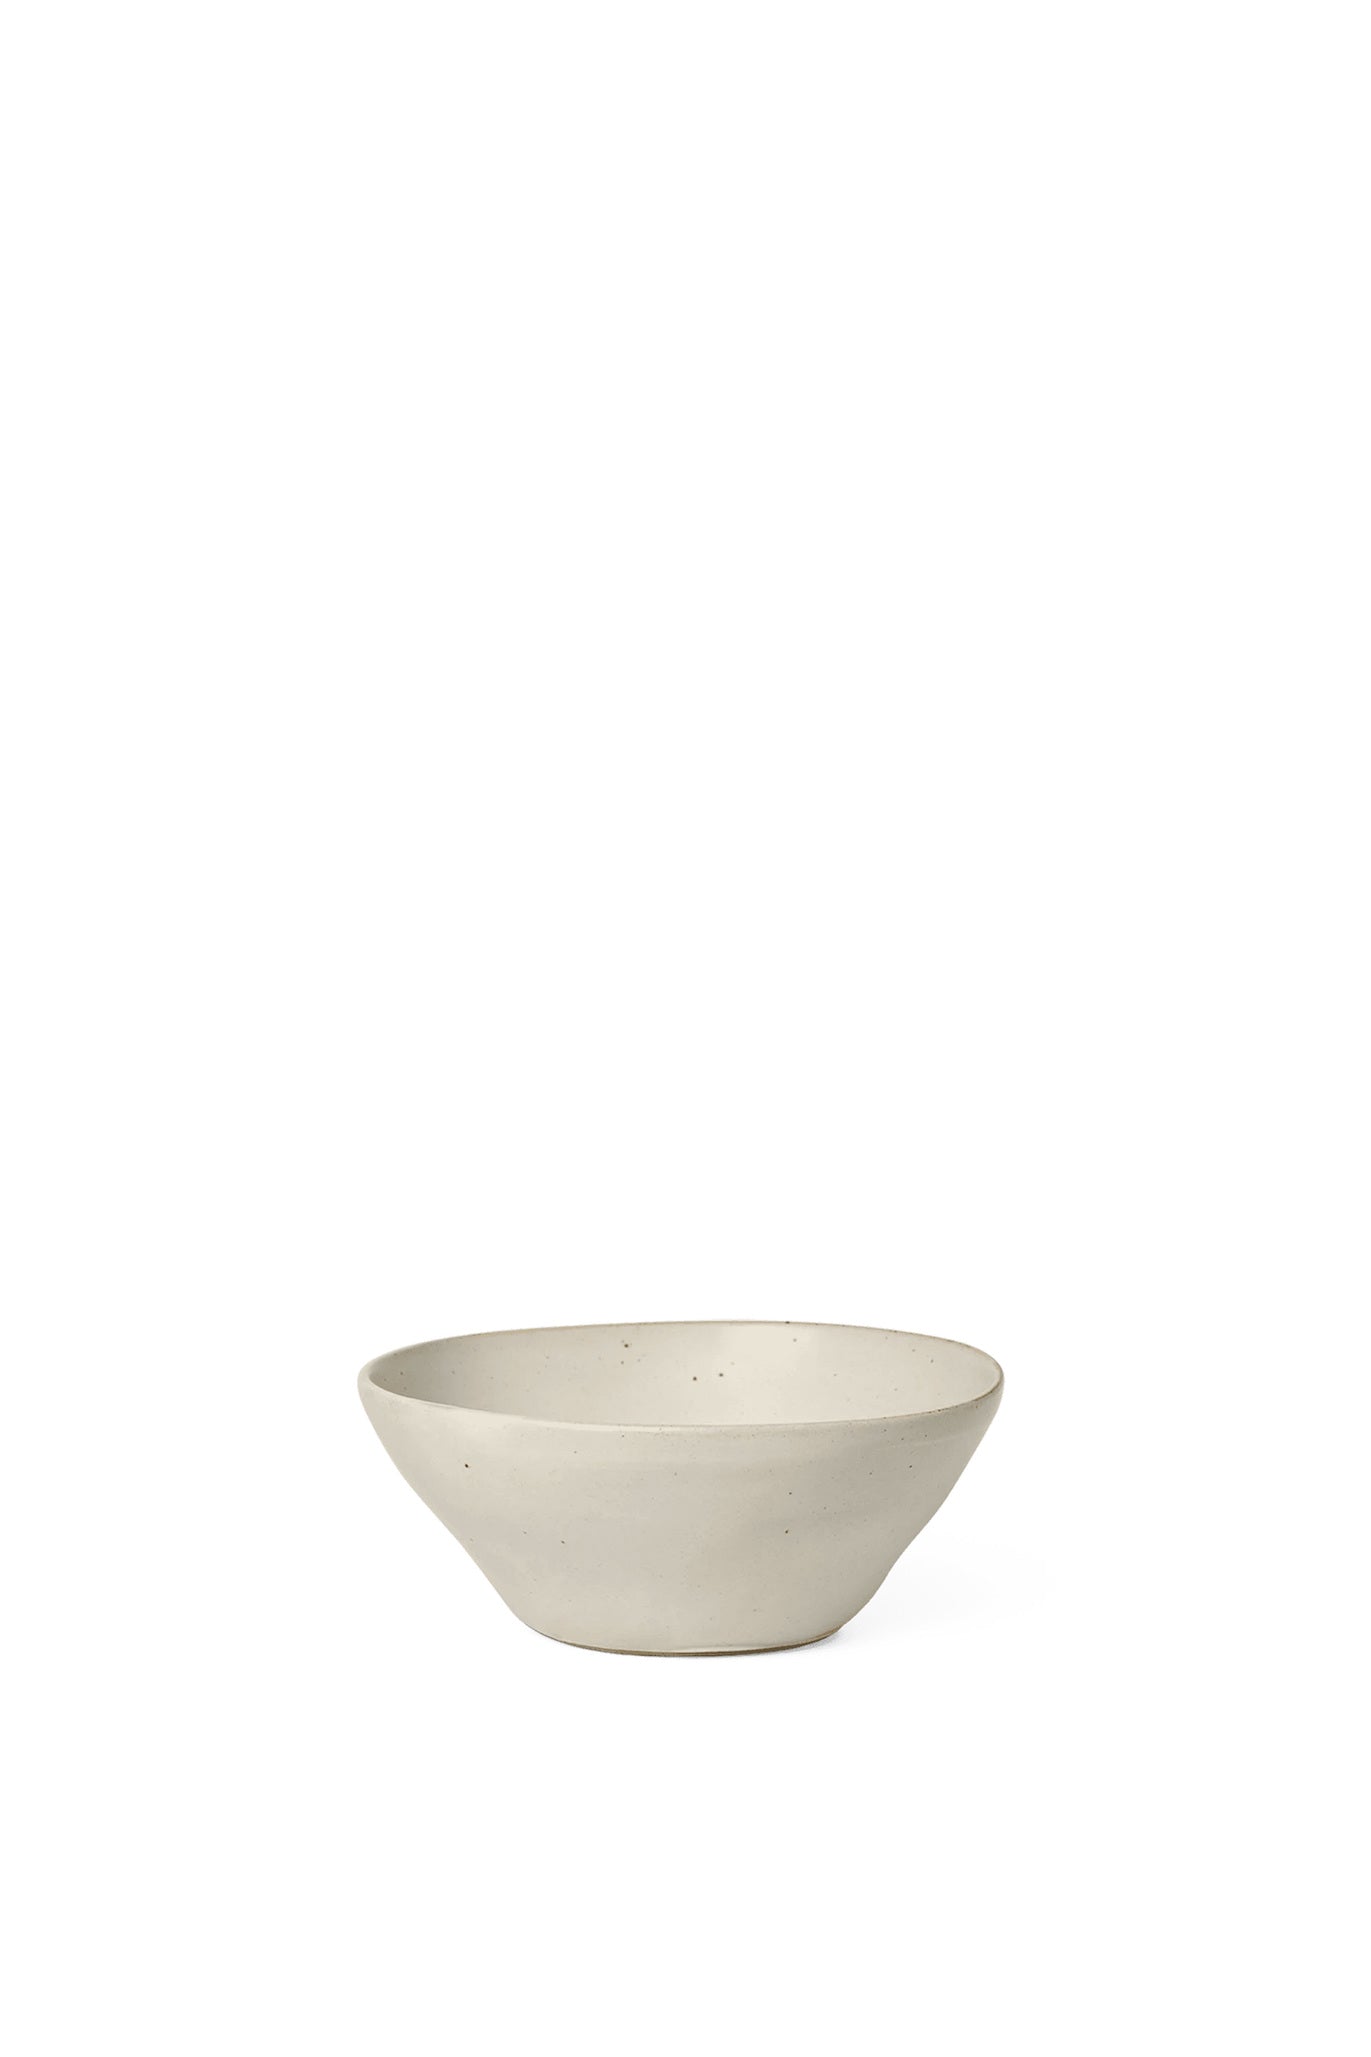 A perfectly imperfect serving bowl made to modern sensibilities using traditional craftsmanship techniques in off white.